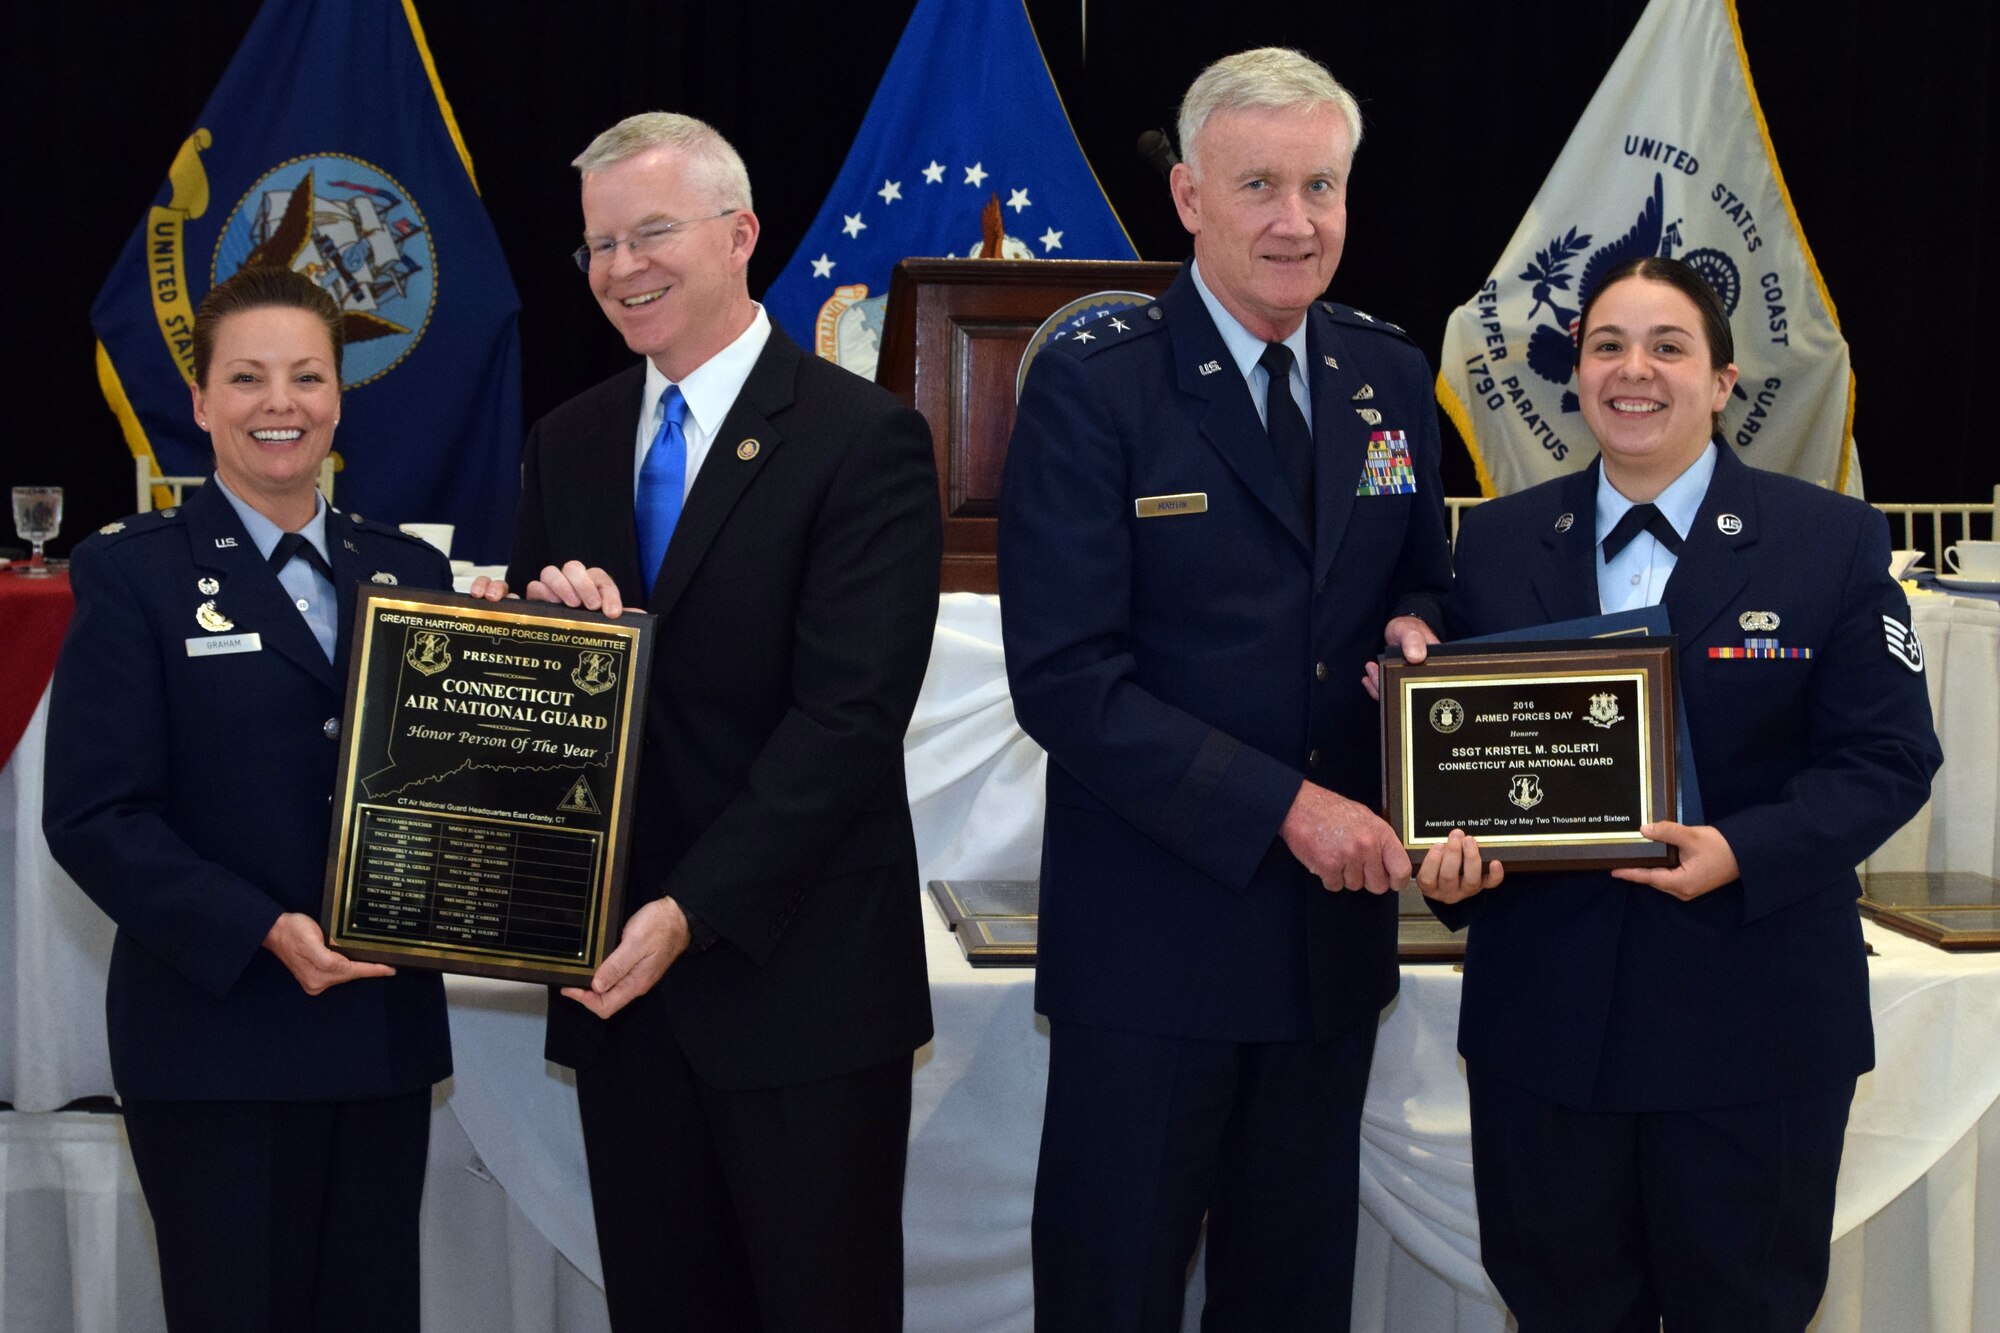 Staff Sgt. Kristel M. Solerti (far right), a personnelist with the 103rd Force Support Squadron is presented the award as the 2016 Armed Forces Day luncheon honoree for the Connecticut Air National Guard by (left to right) Lt. Col. Kristine Graham, commander, 103rd FSS, Sean Connolly, Commissioner of the Connecticut Department of Veterans Affairs and Maj. Gen. Thad Martin, Adjutant General of the Connecticut National Guard. (Photo by Staff Sgt. Benjamin Simon, JFHQ Public Affairs, CTARNG)